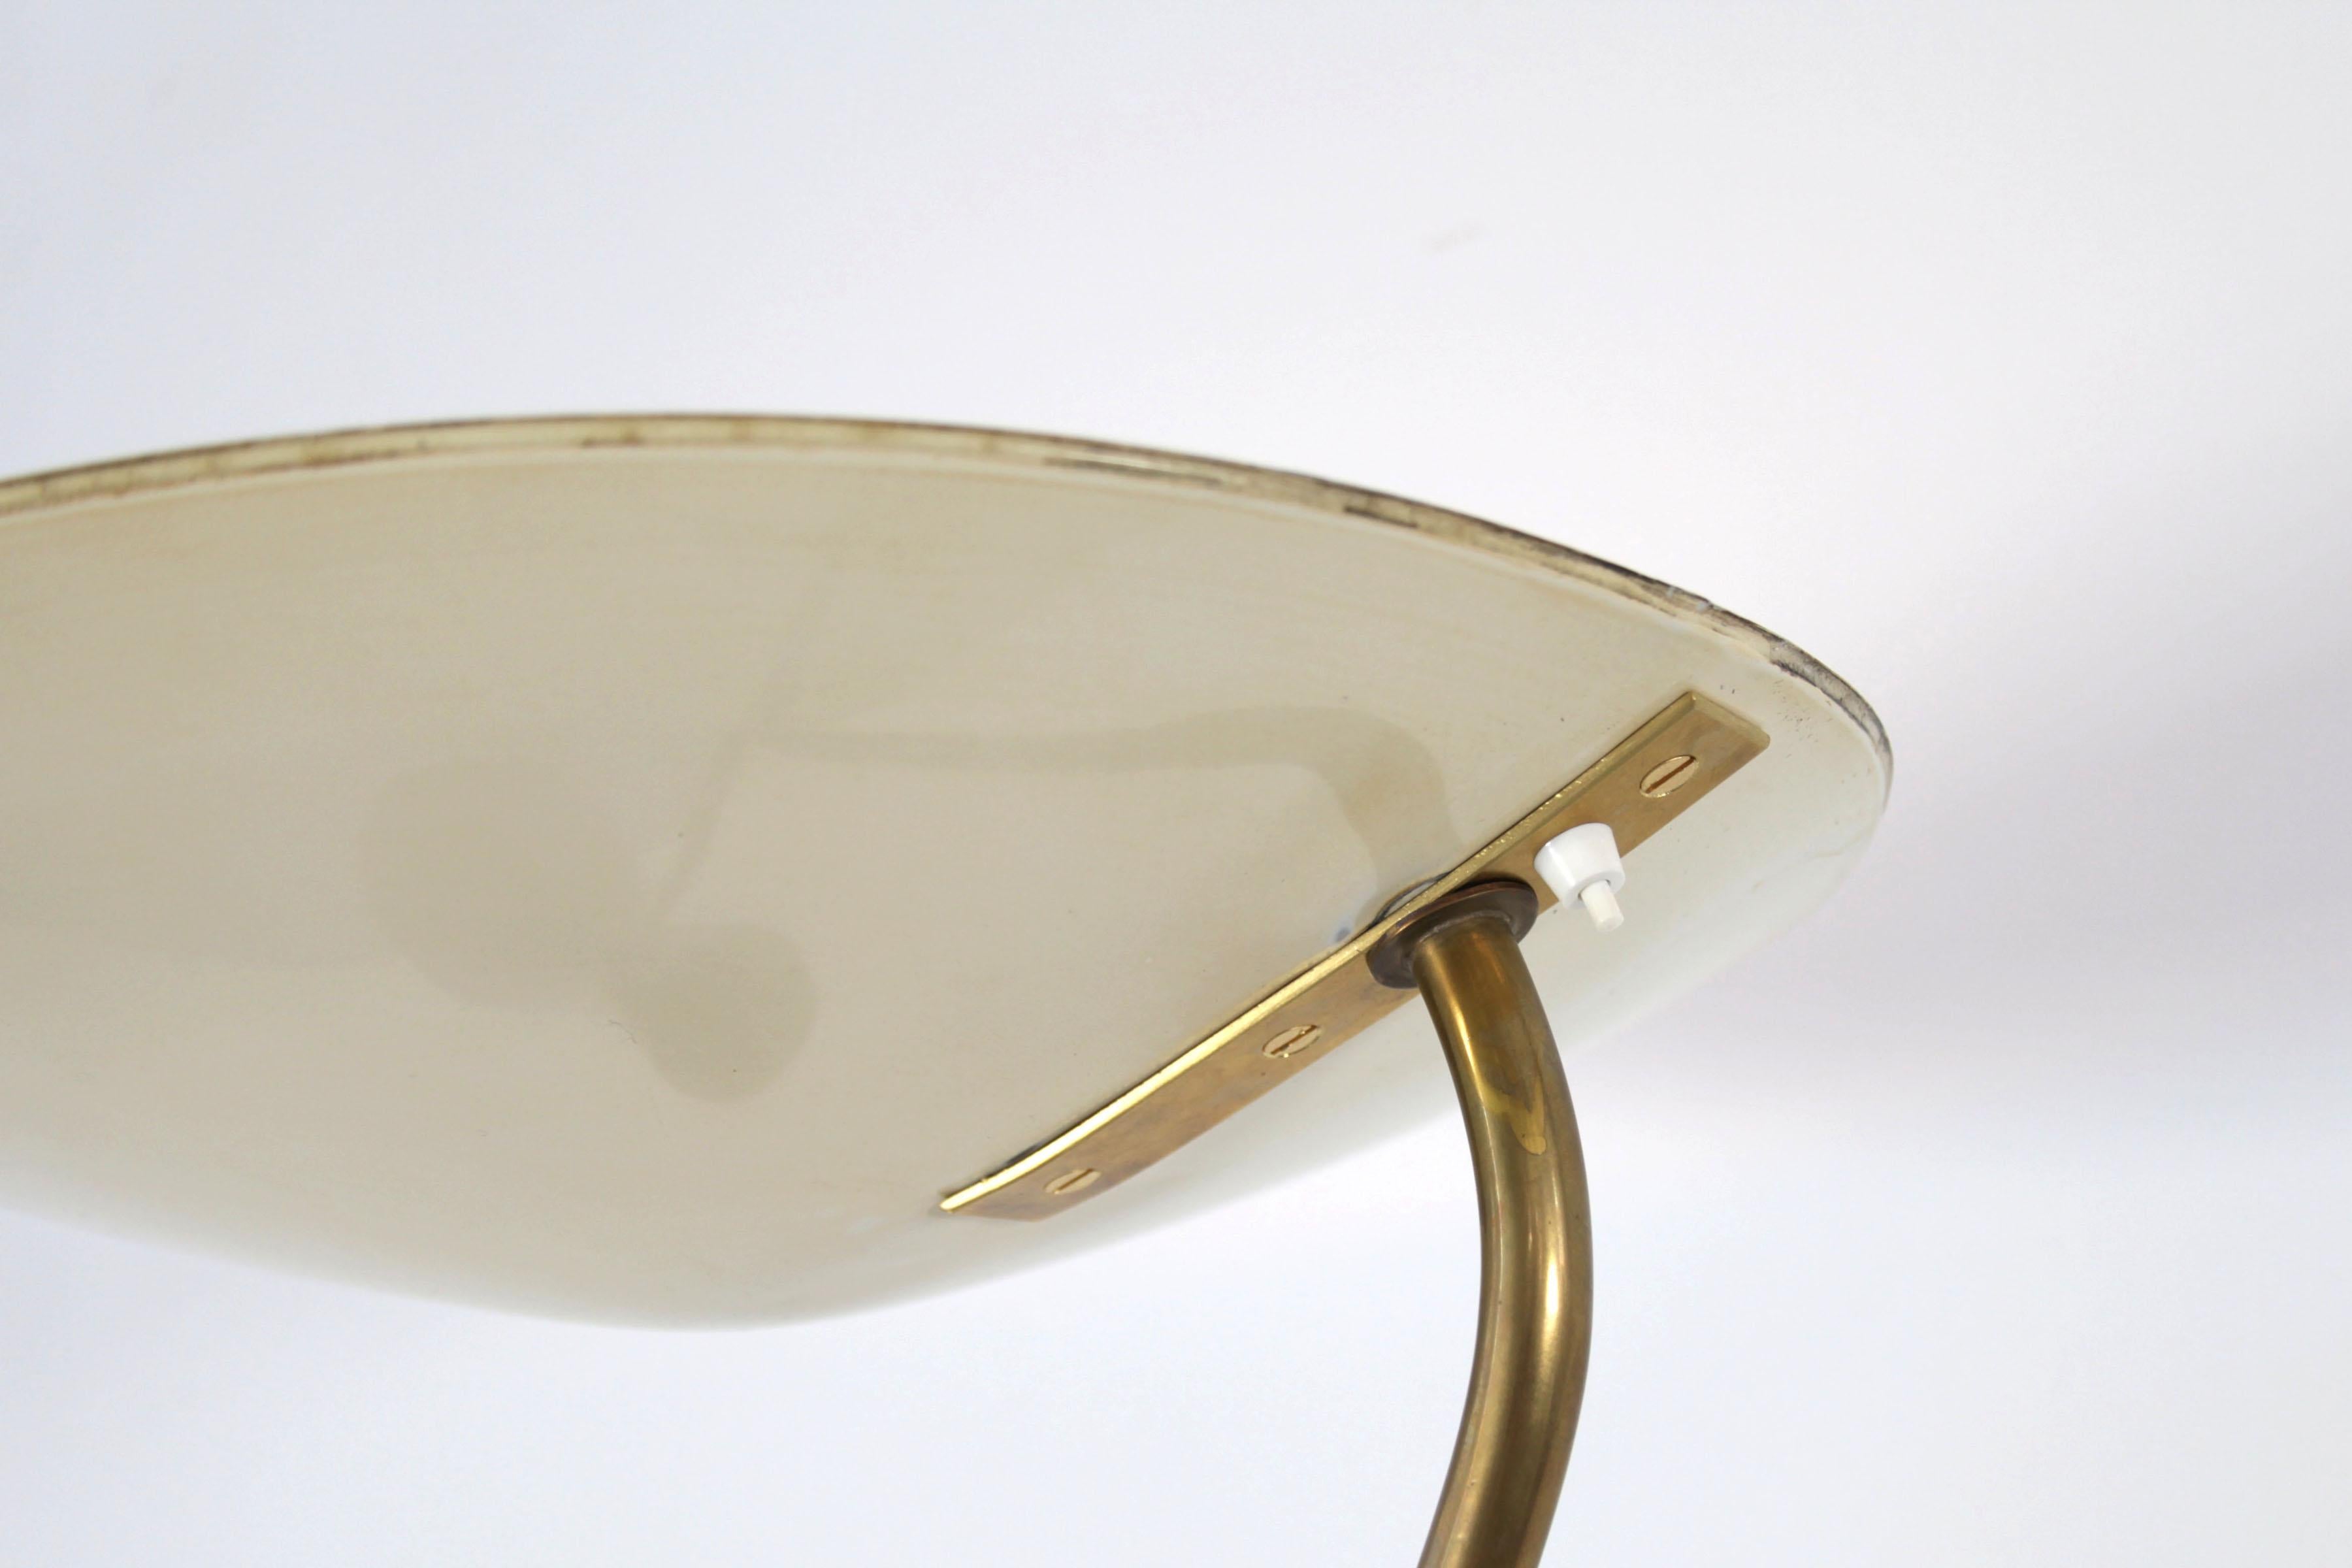 Swiss Floor Lamp with Lacquered Metal Shades, by Eberth Zürich, Switzerland, 1950s For Sale